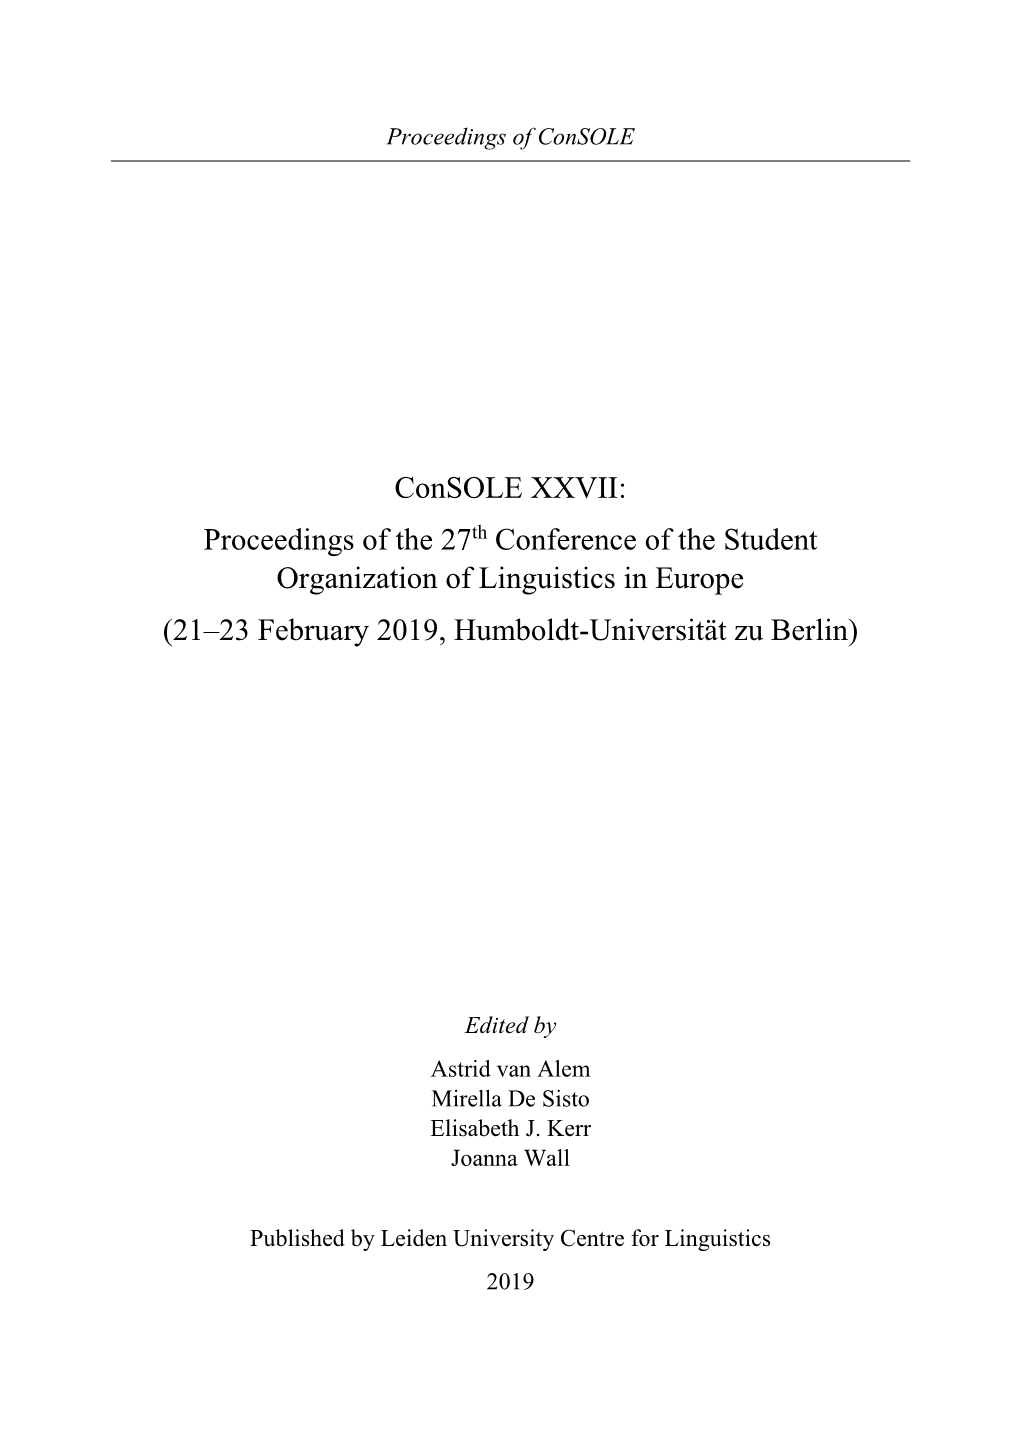 Console XXVII: Proceedings of the 27Th Conference of the Student Organization of Linguistics in Europe (21–23 February 2019, Humboldt-Universität Zu Berlin)